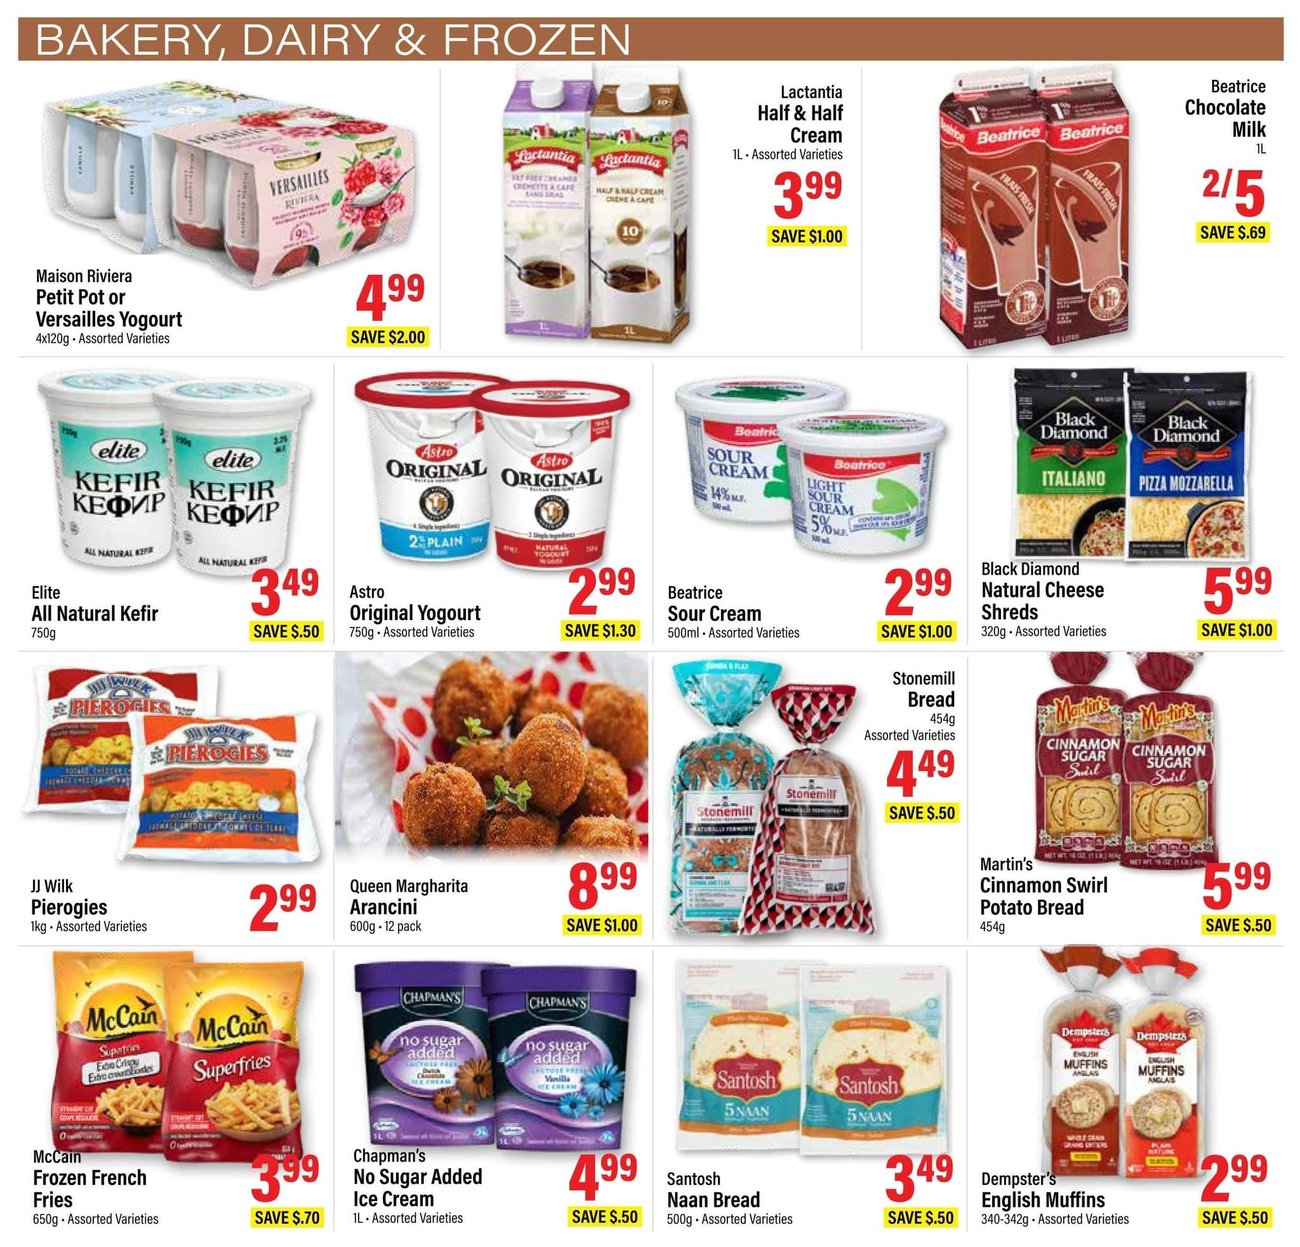 Commisso's Fresh Foods - Weekly Flyer Specials - Page 11